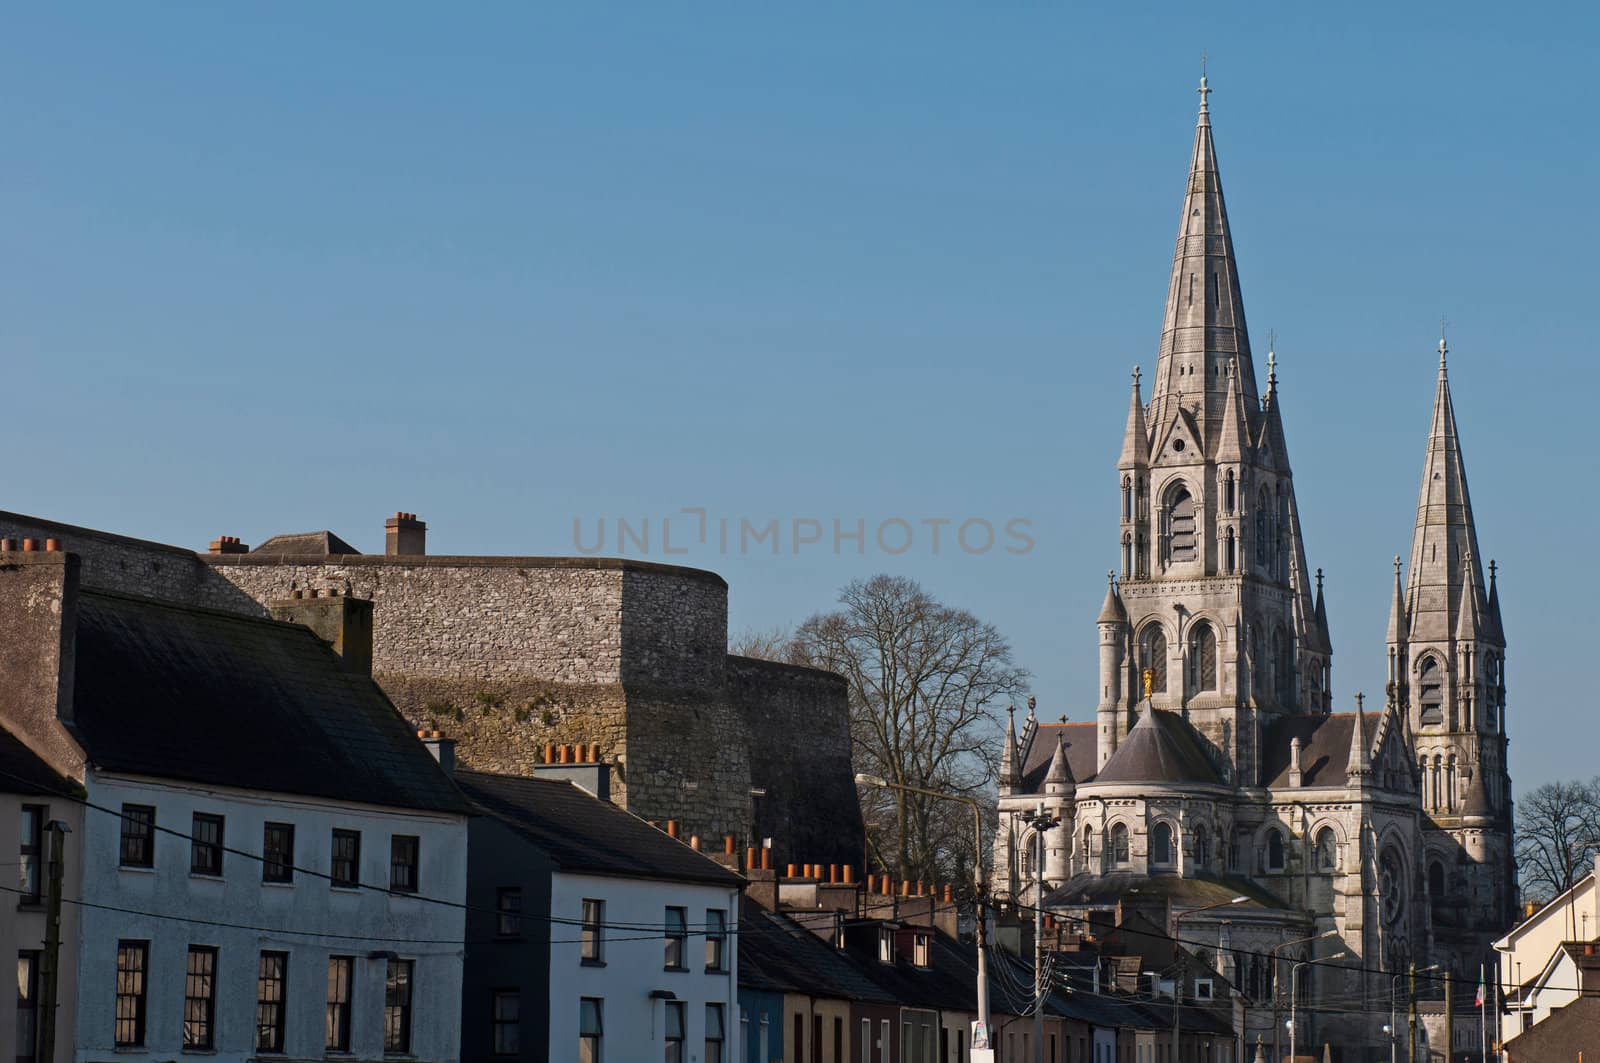 Cork cityscape featuring at the left Elizabeth Fort and on the right Saint Fin Barre's Cathedral, Ireland (blue sky background)